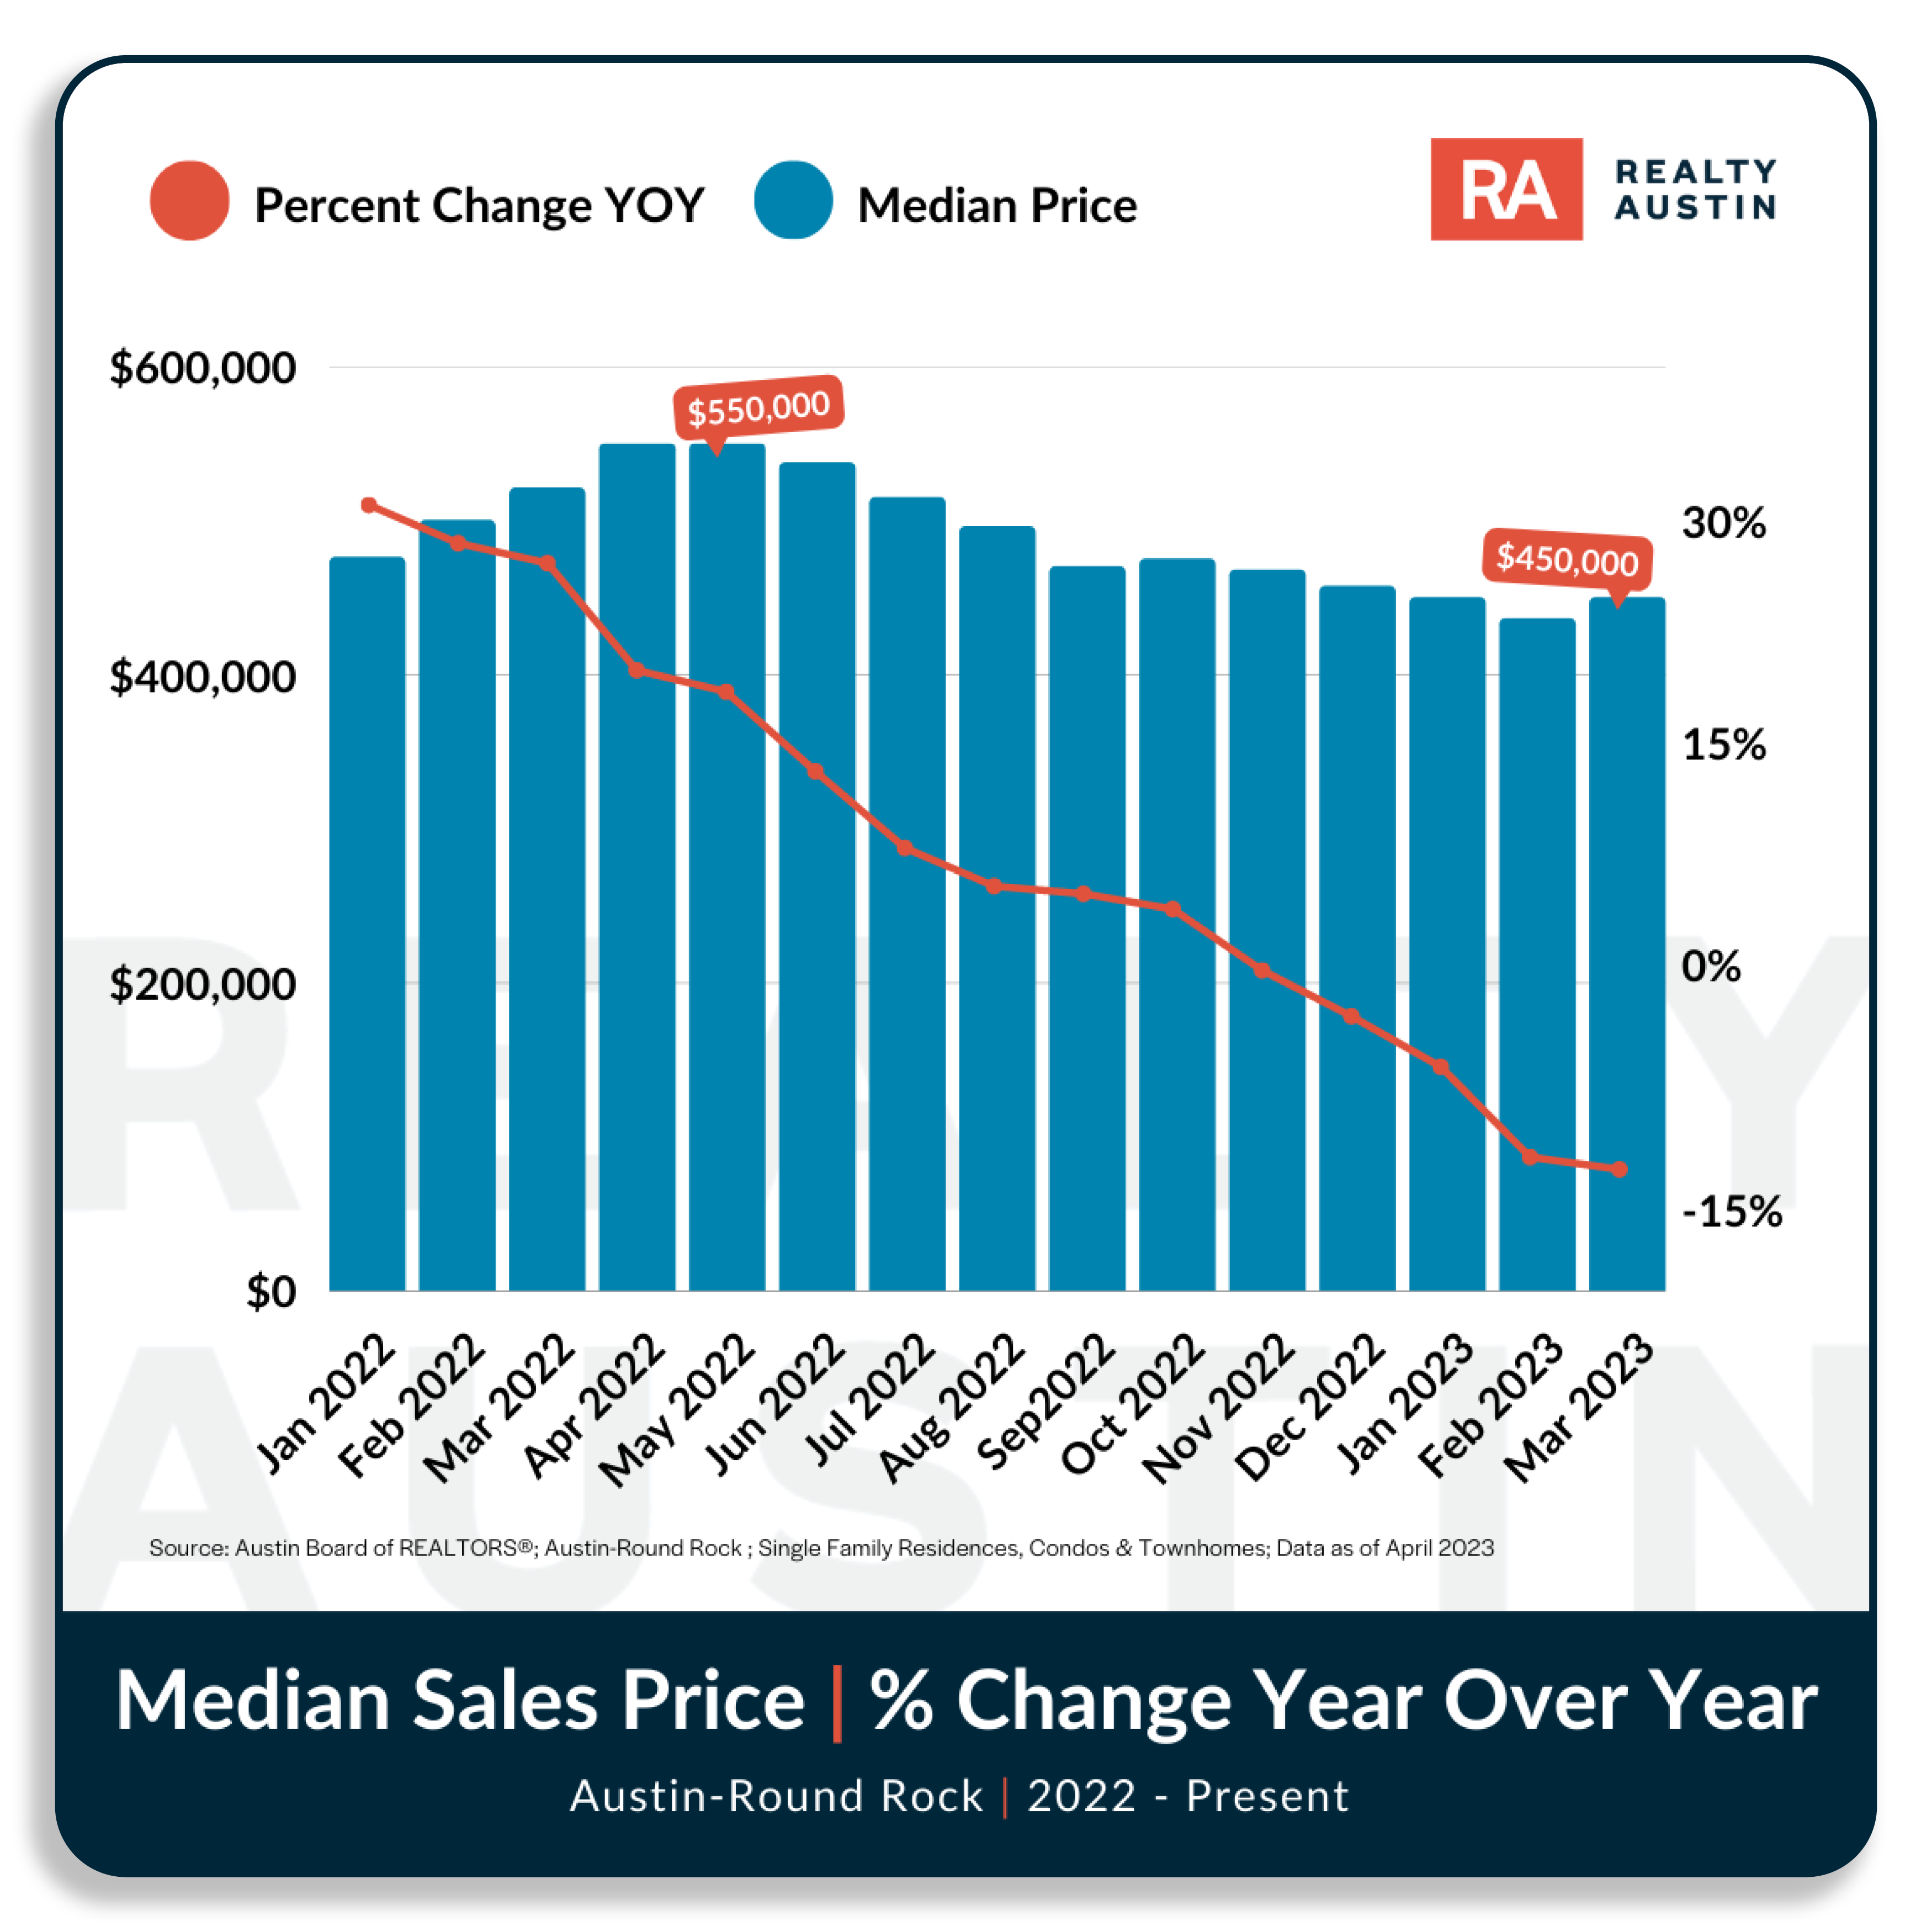 Percentage Change YOY and Median Price.